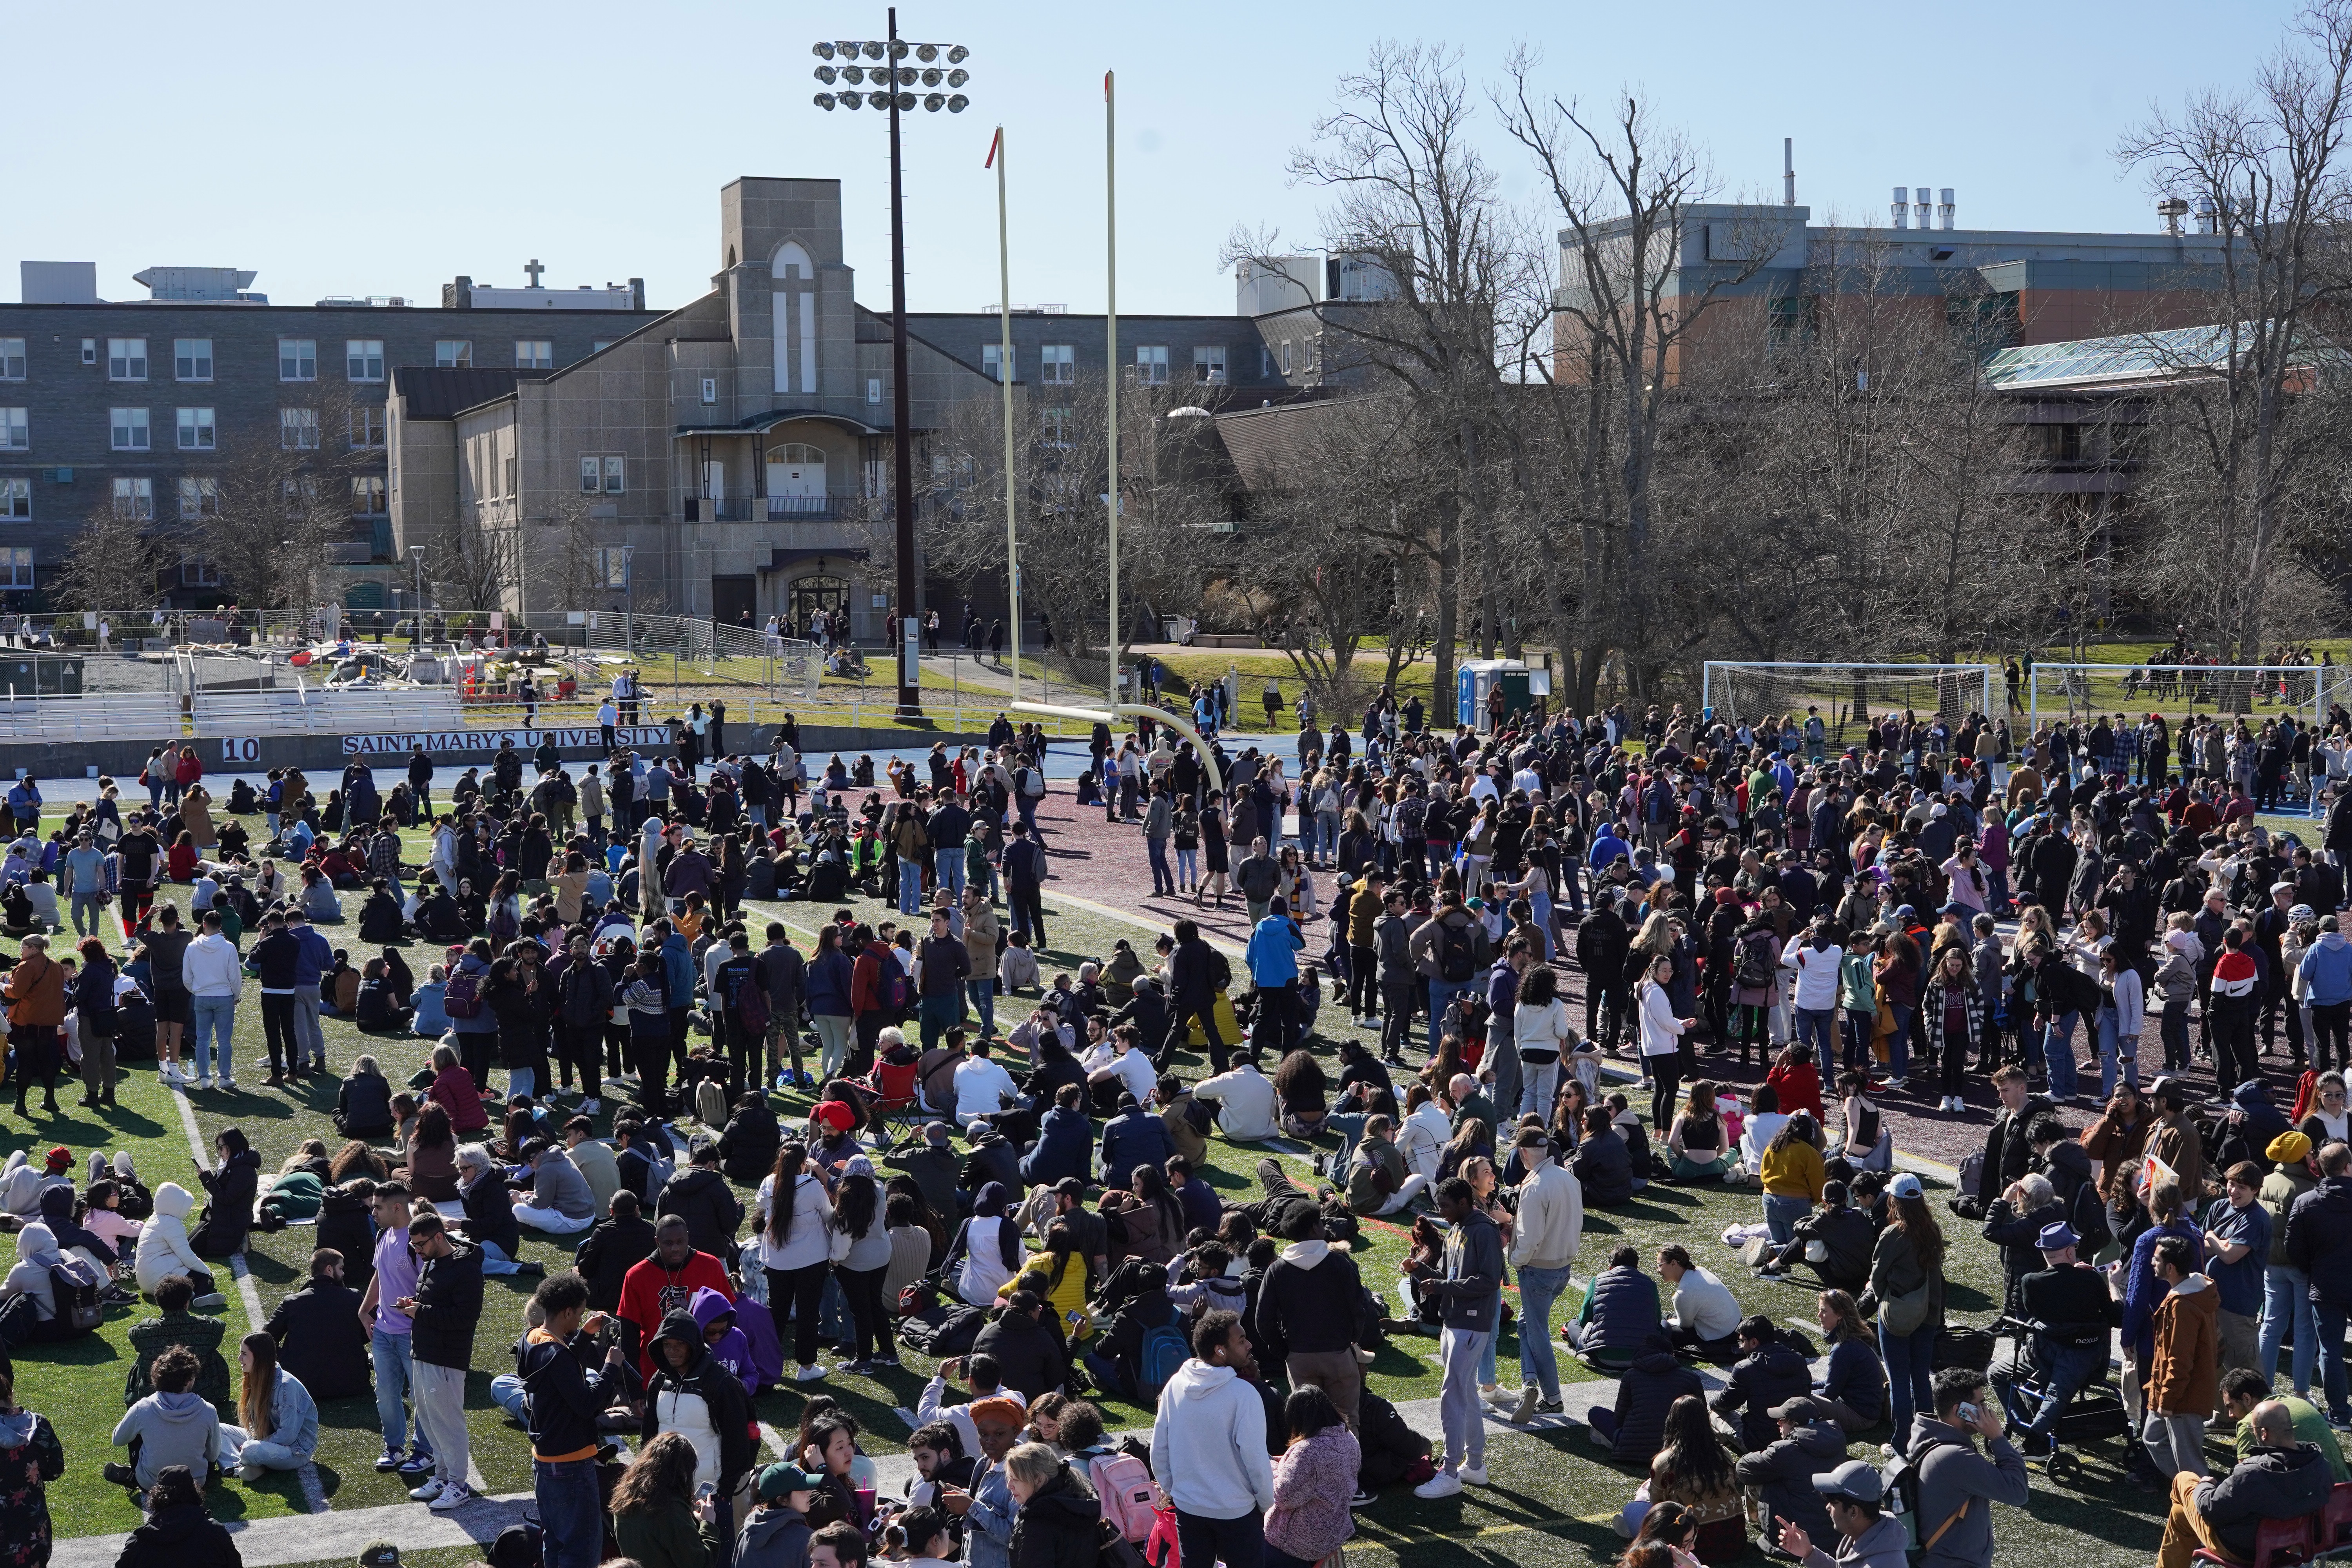 Image of a large crowd gathered on the football field at SMU under clear blue skies.